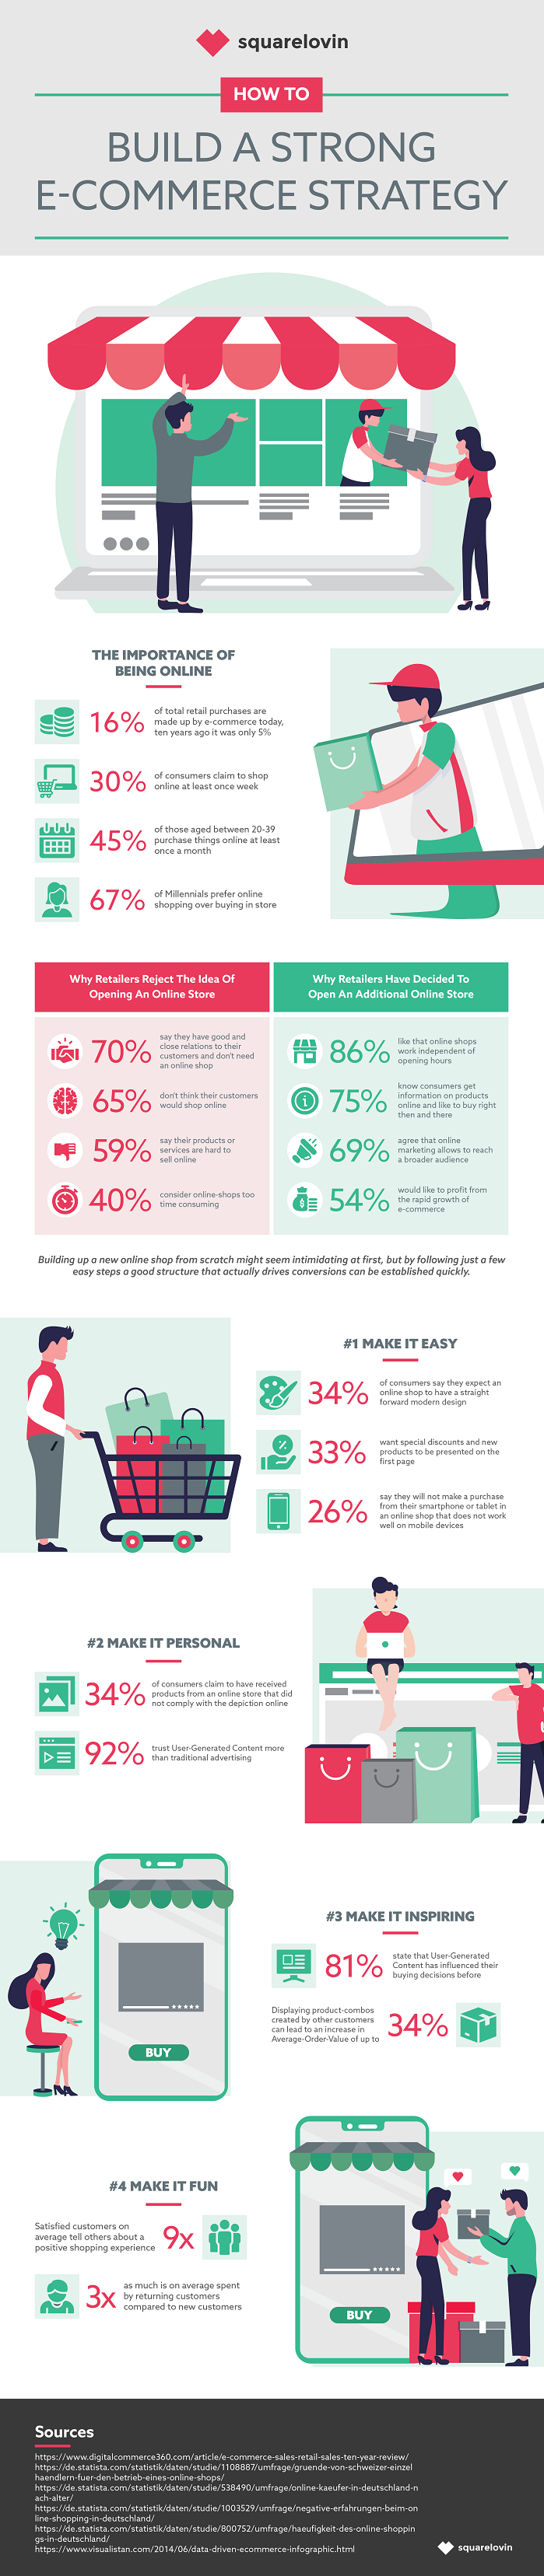 4 steps to build a strong ecommerce strategy infographic